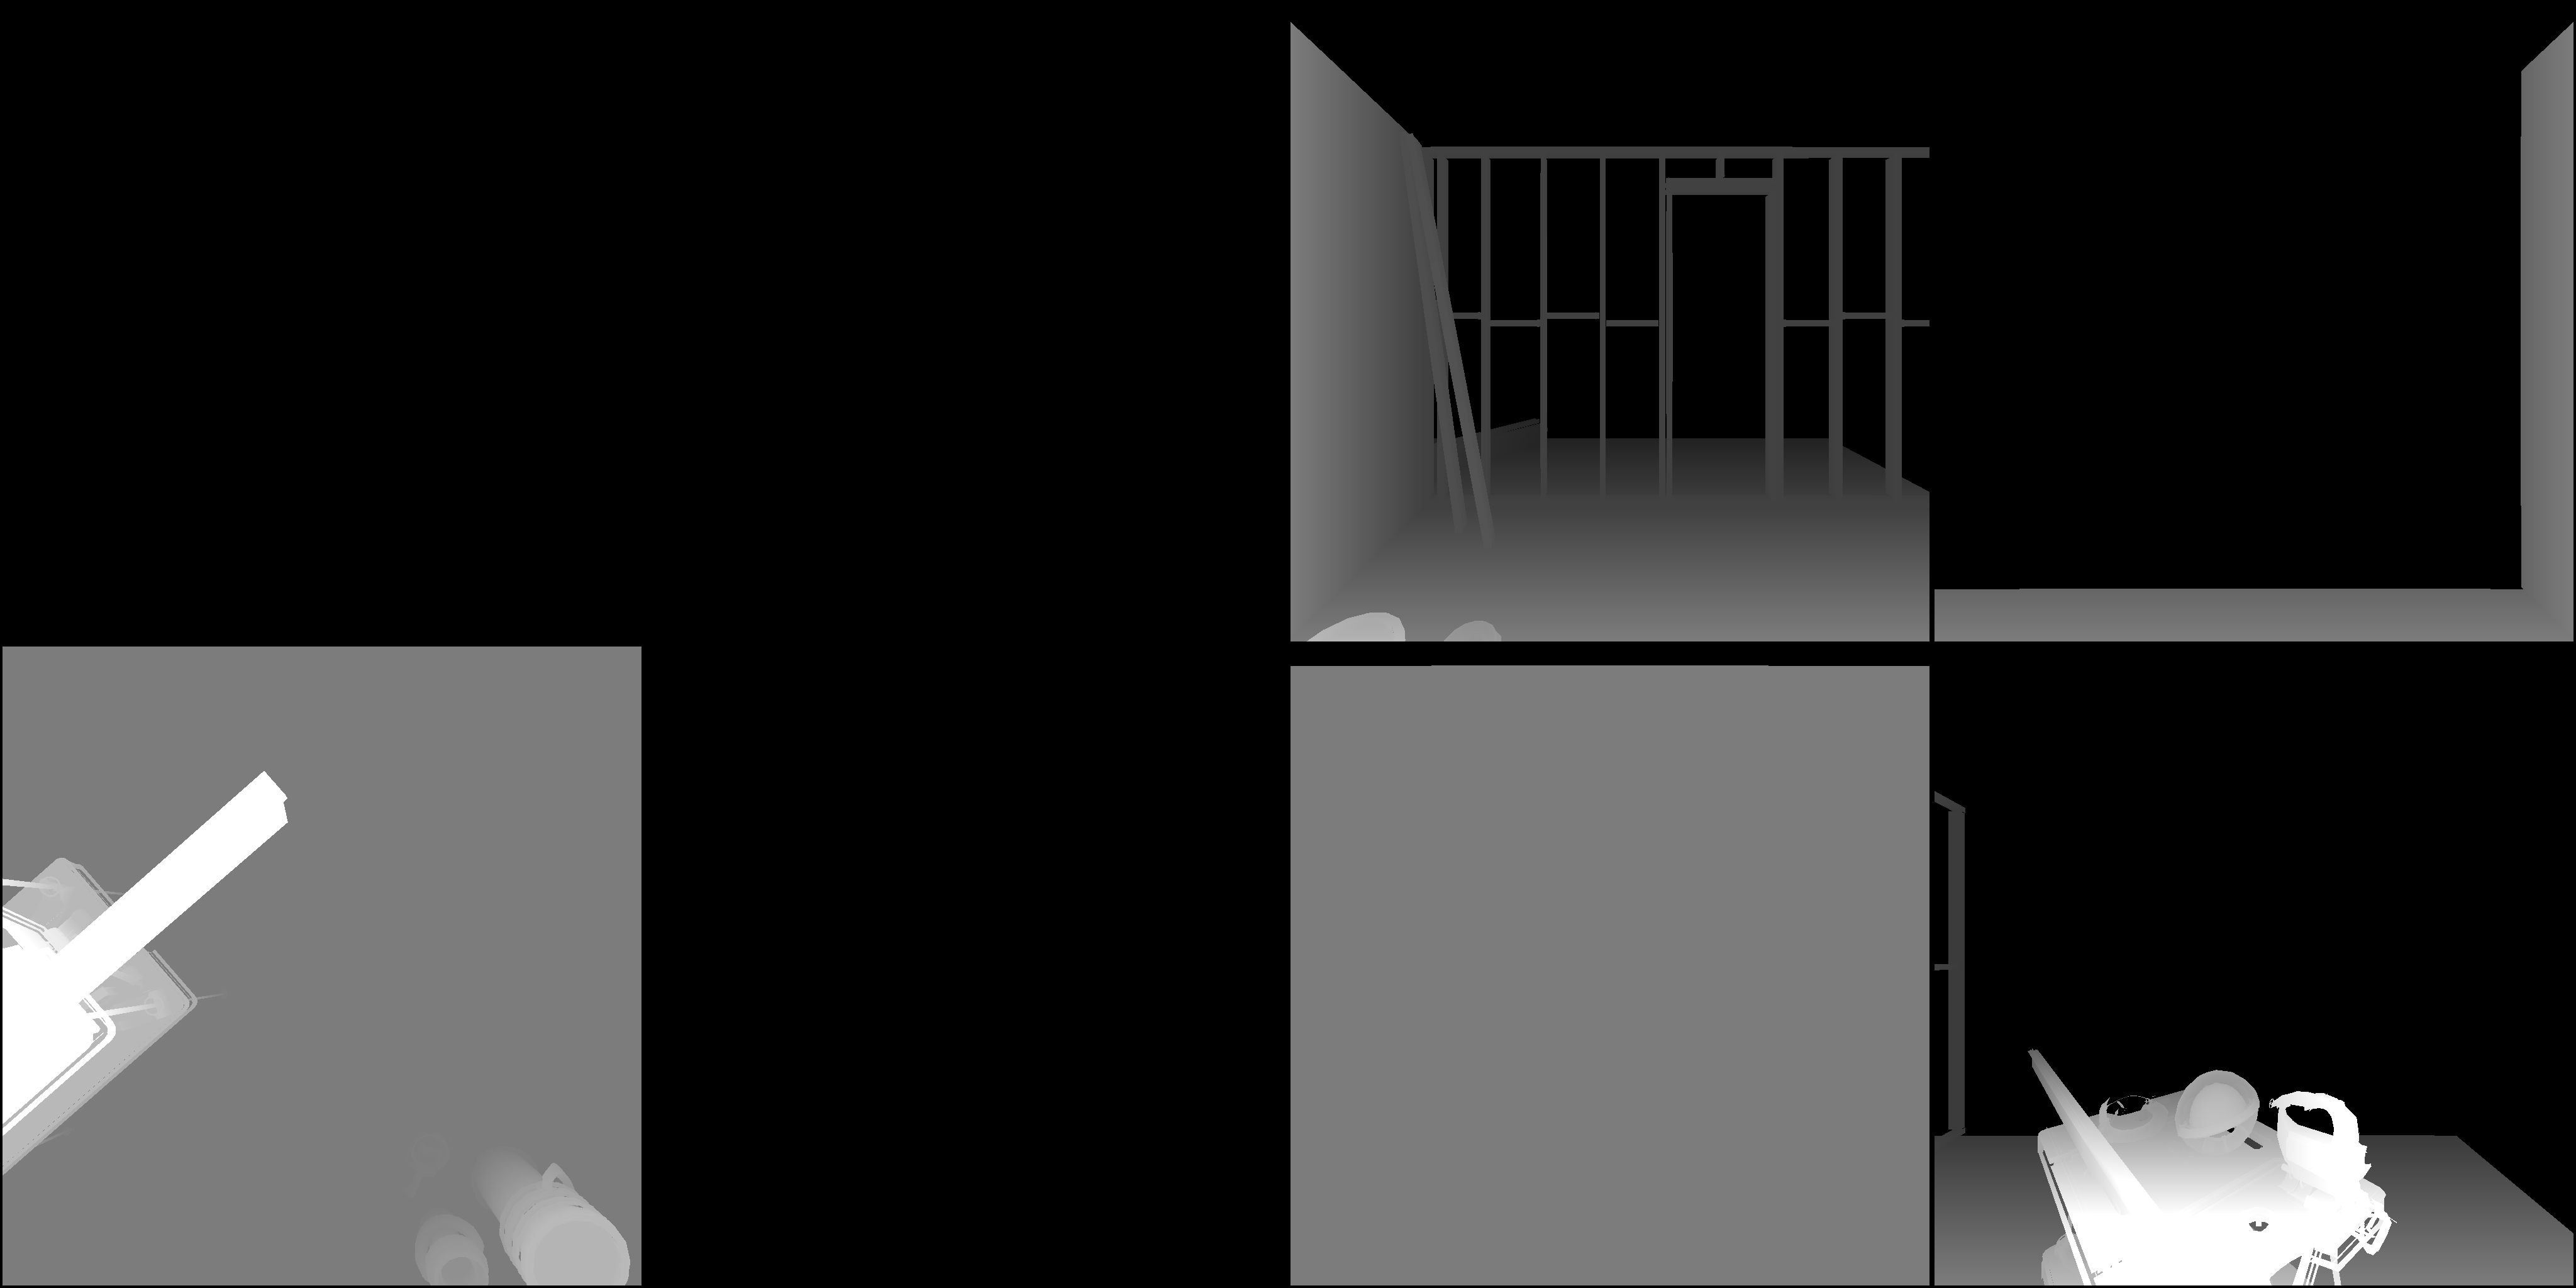 Realtime-point-light-shadows-in-unity-URP%20baf834be833f442c9610cd00f4c22bf7/ShadowMap.png